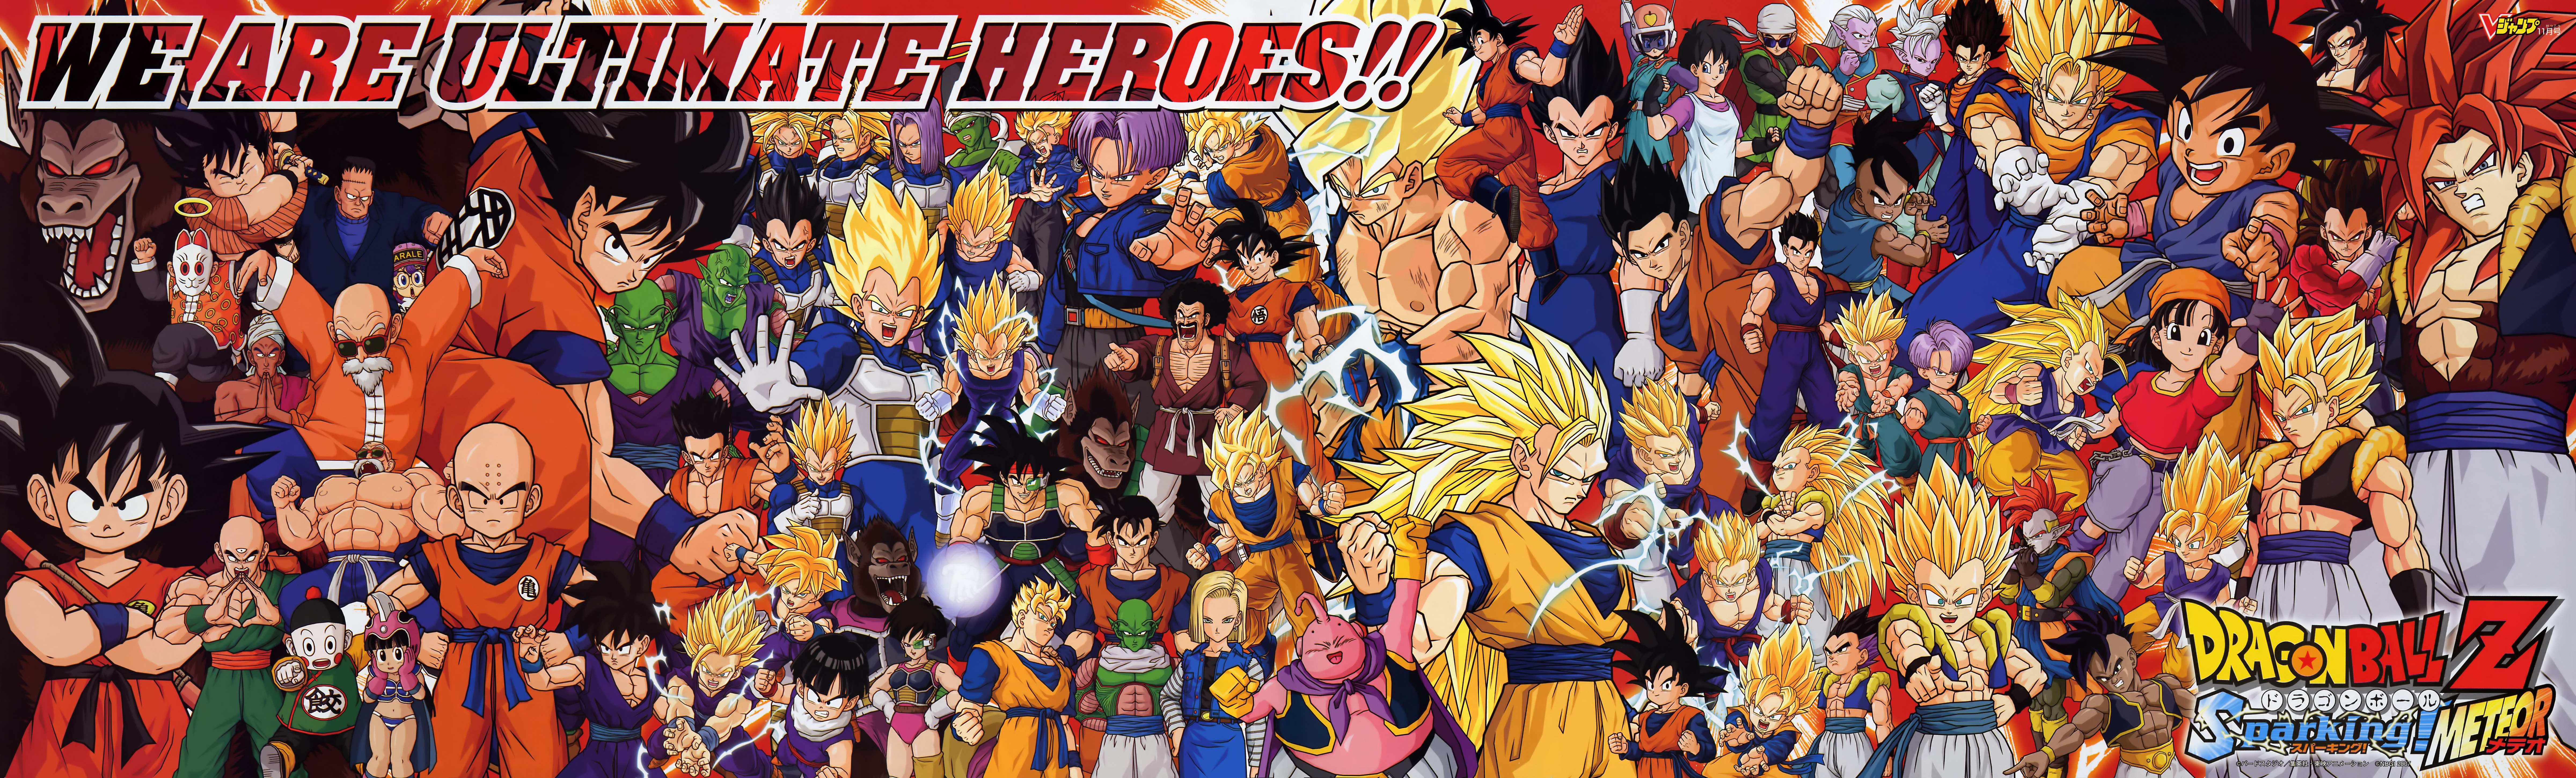 Dragon Ball - Dbz Sparking Meteor All Characters - HD Wallpaper 